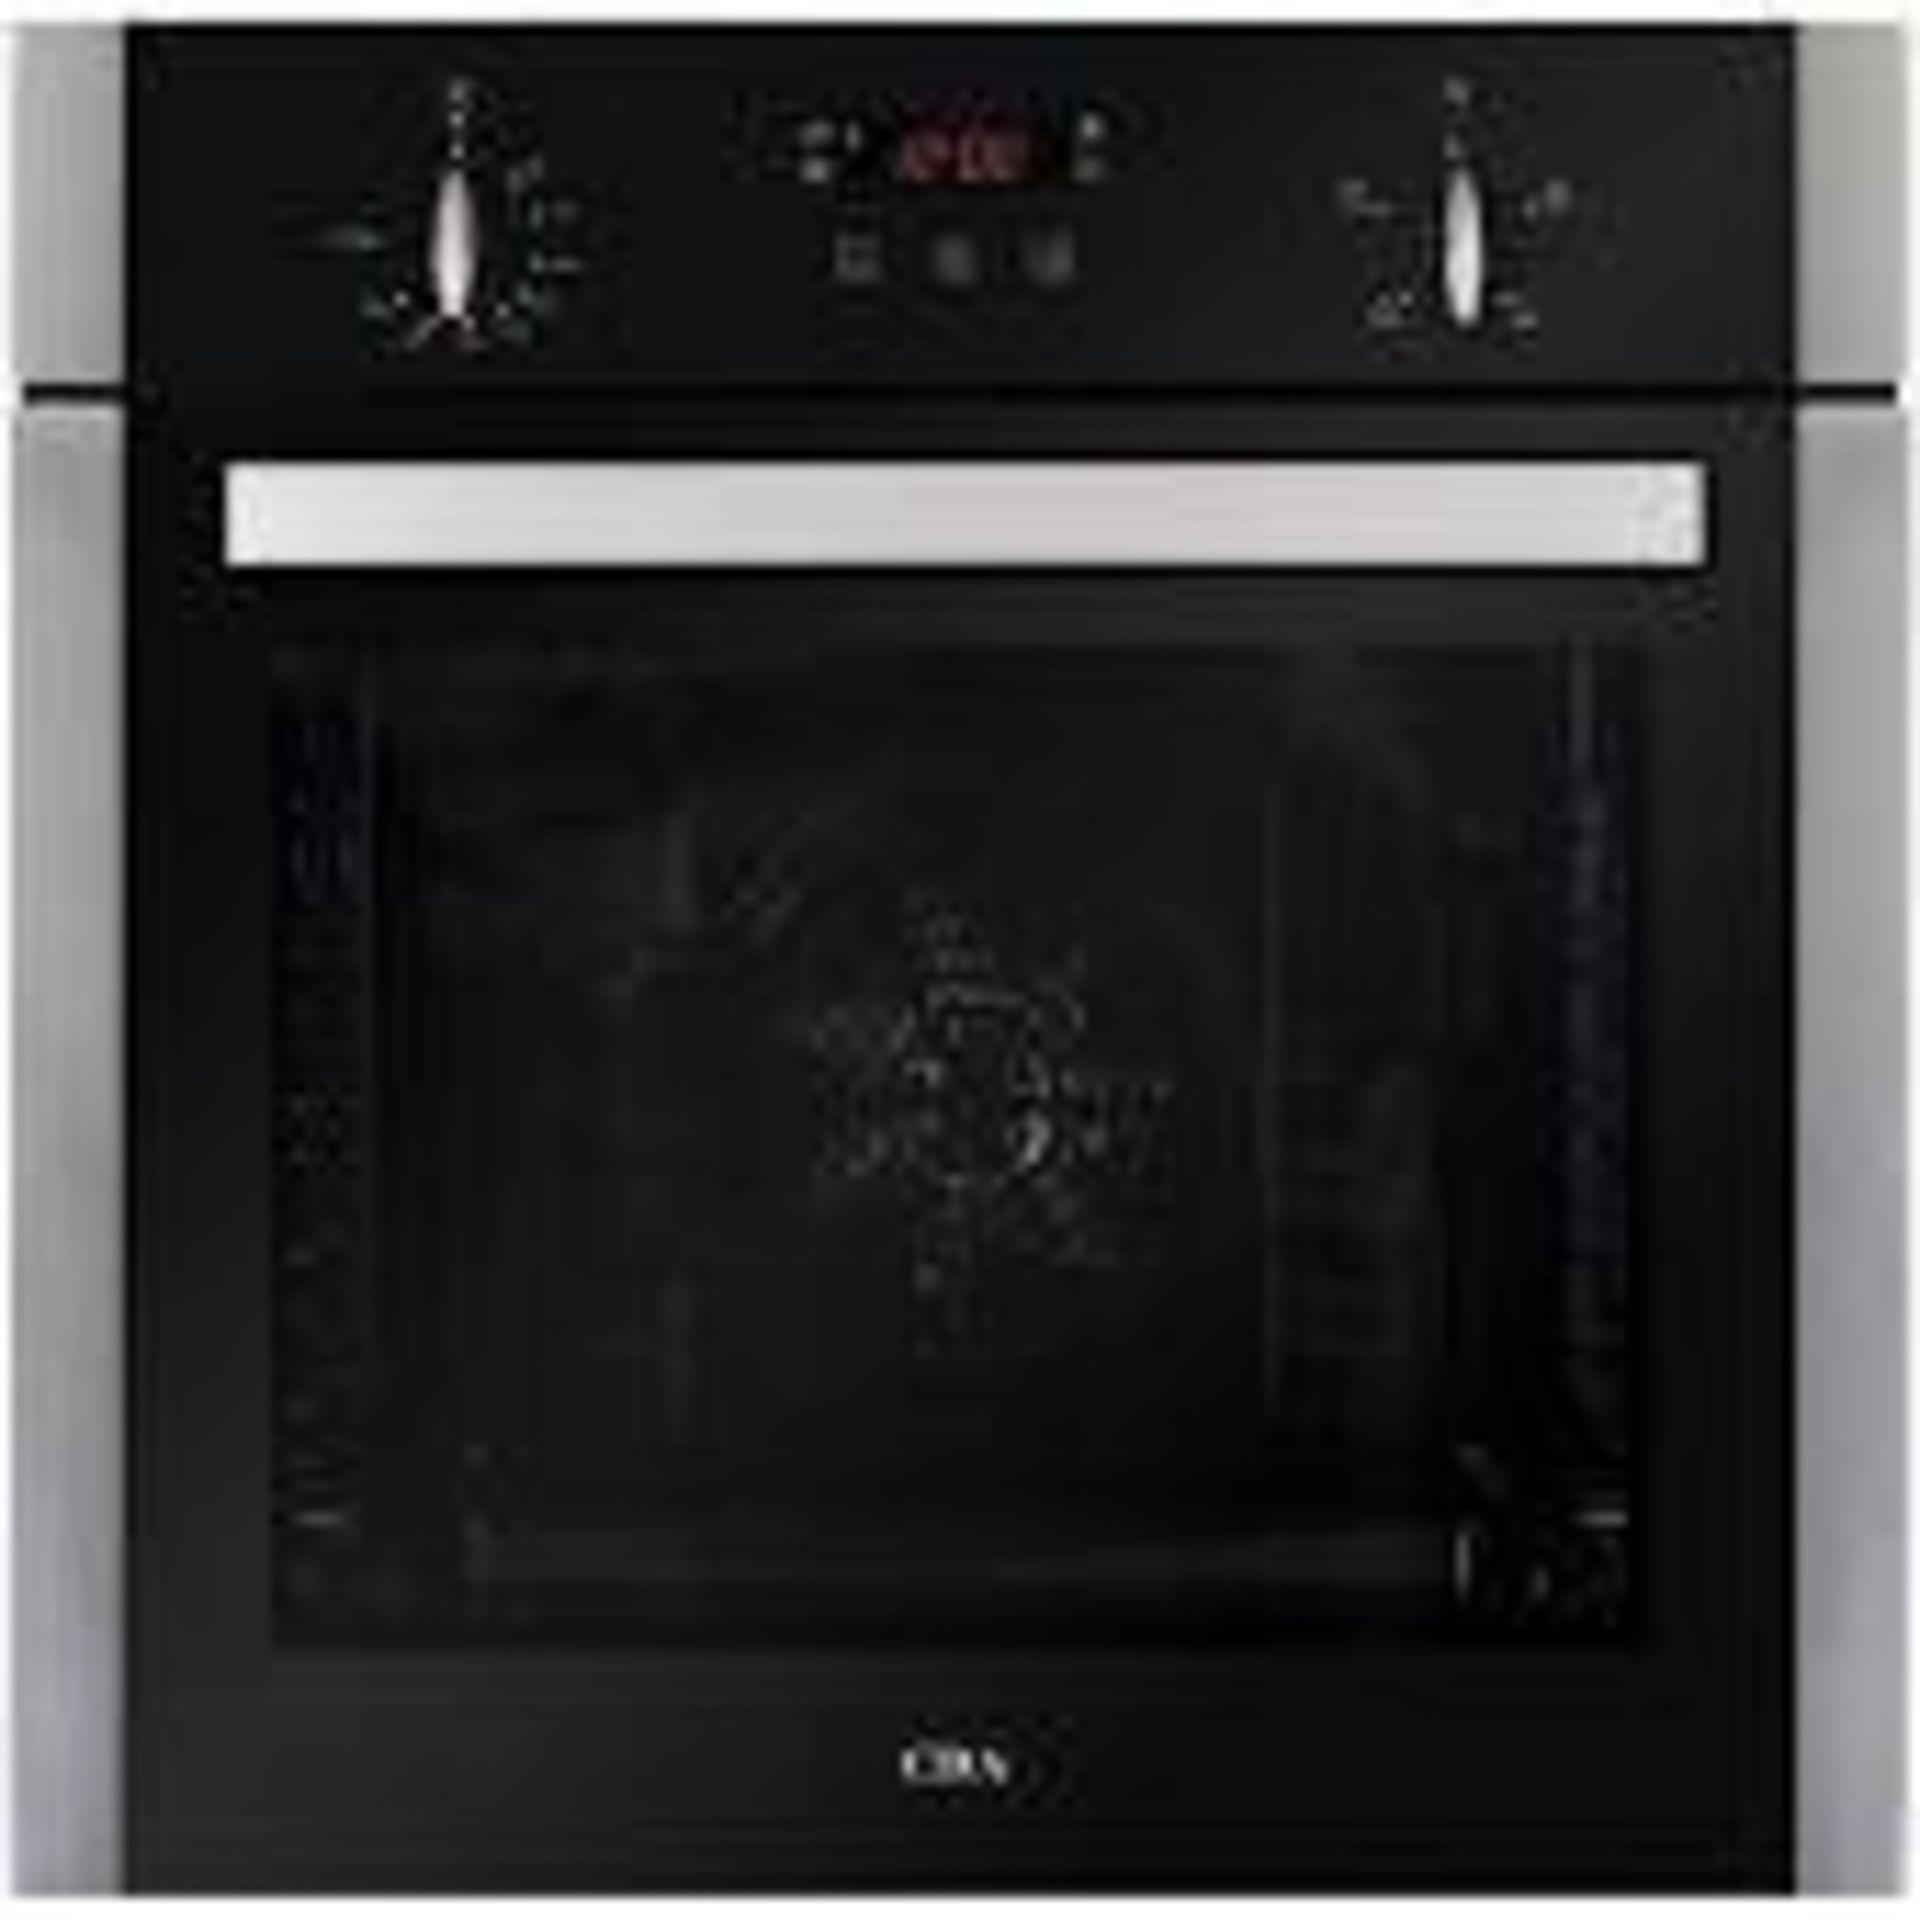 1 GRADE A CDA SK210SS INTEGRATED FOUR FUNCTION ELECTRIC FAN OVEN / RRP £309.00